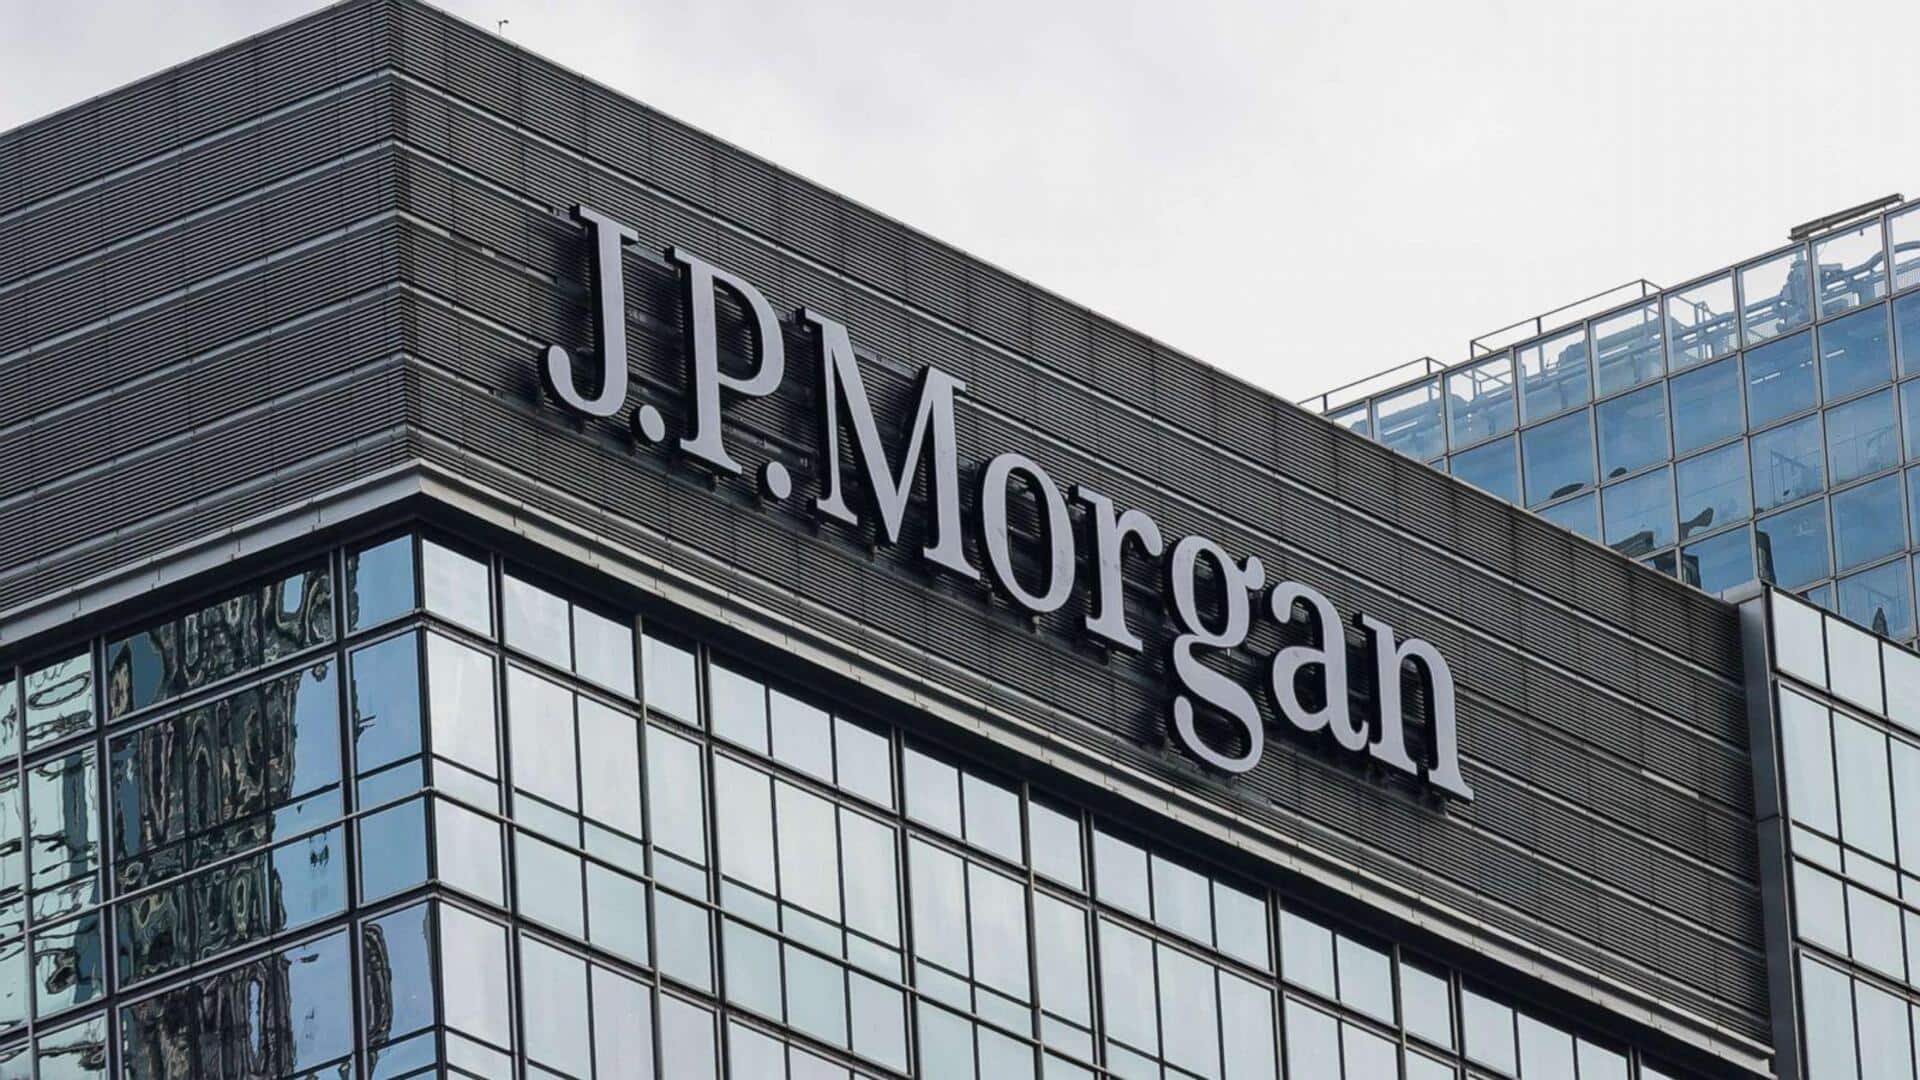 JPMorgan Chase faces 45 billion daily cyber attack attempts